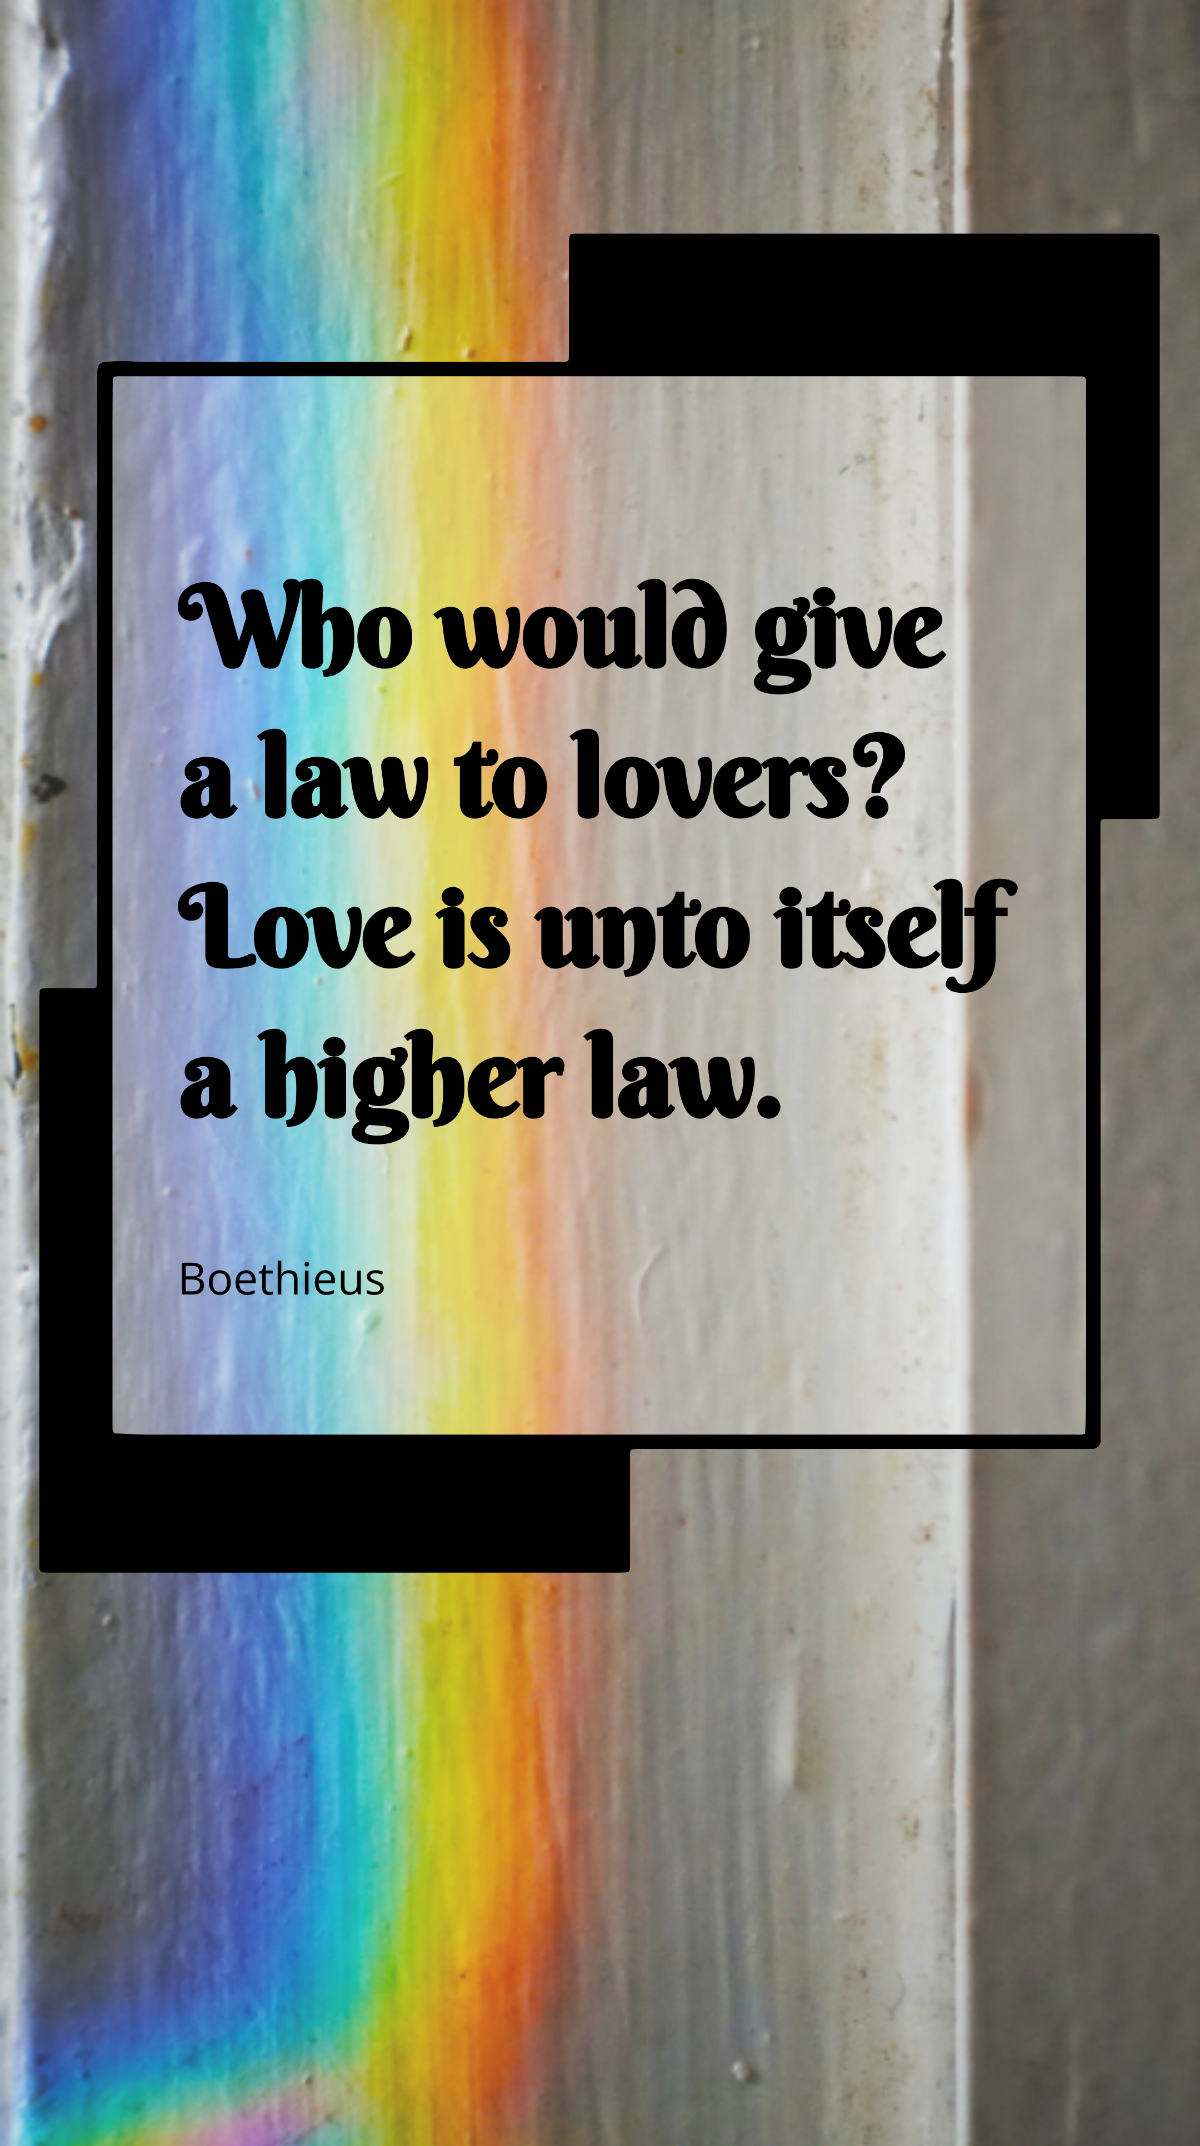 Boethieus - Who would give a law to lovers? Love is unto itself a higher law. Template